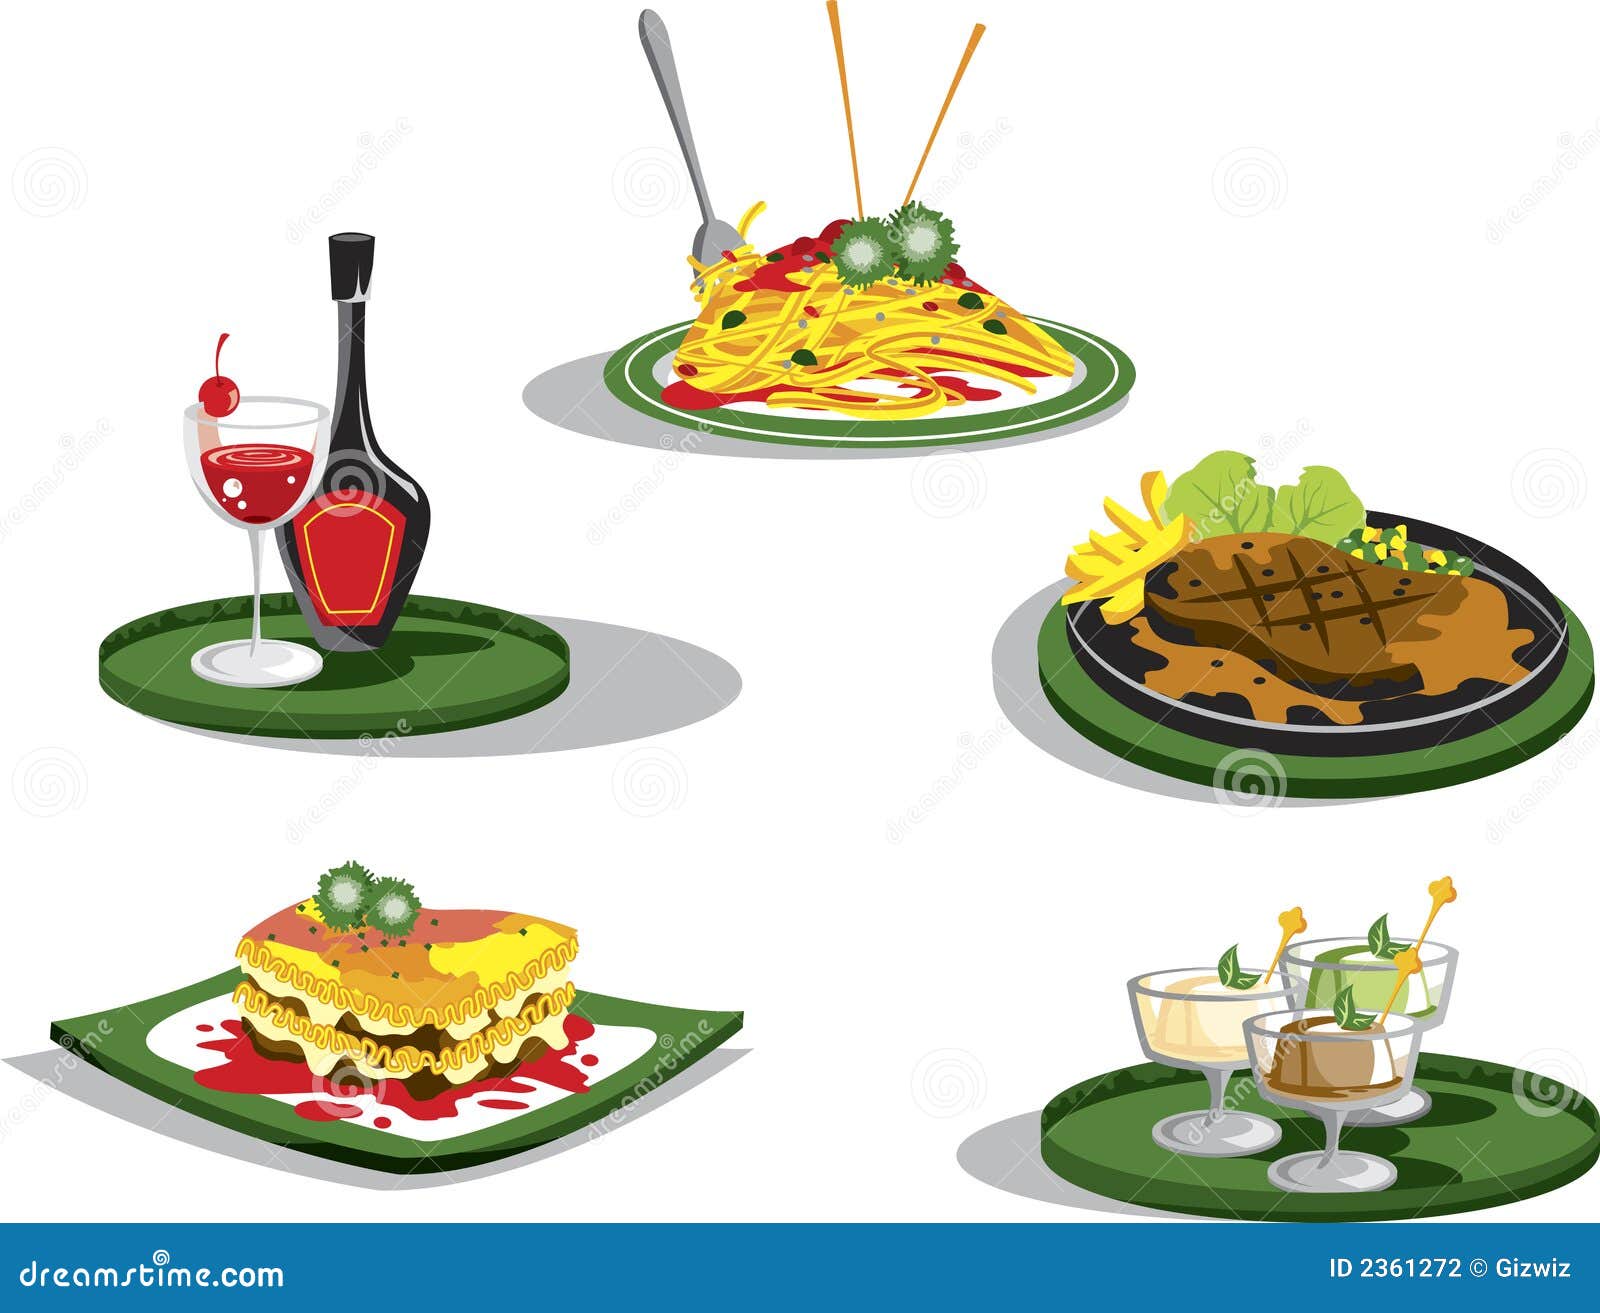 cafe food clipart - photo #32